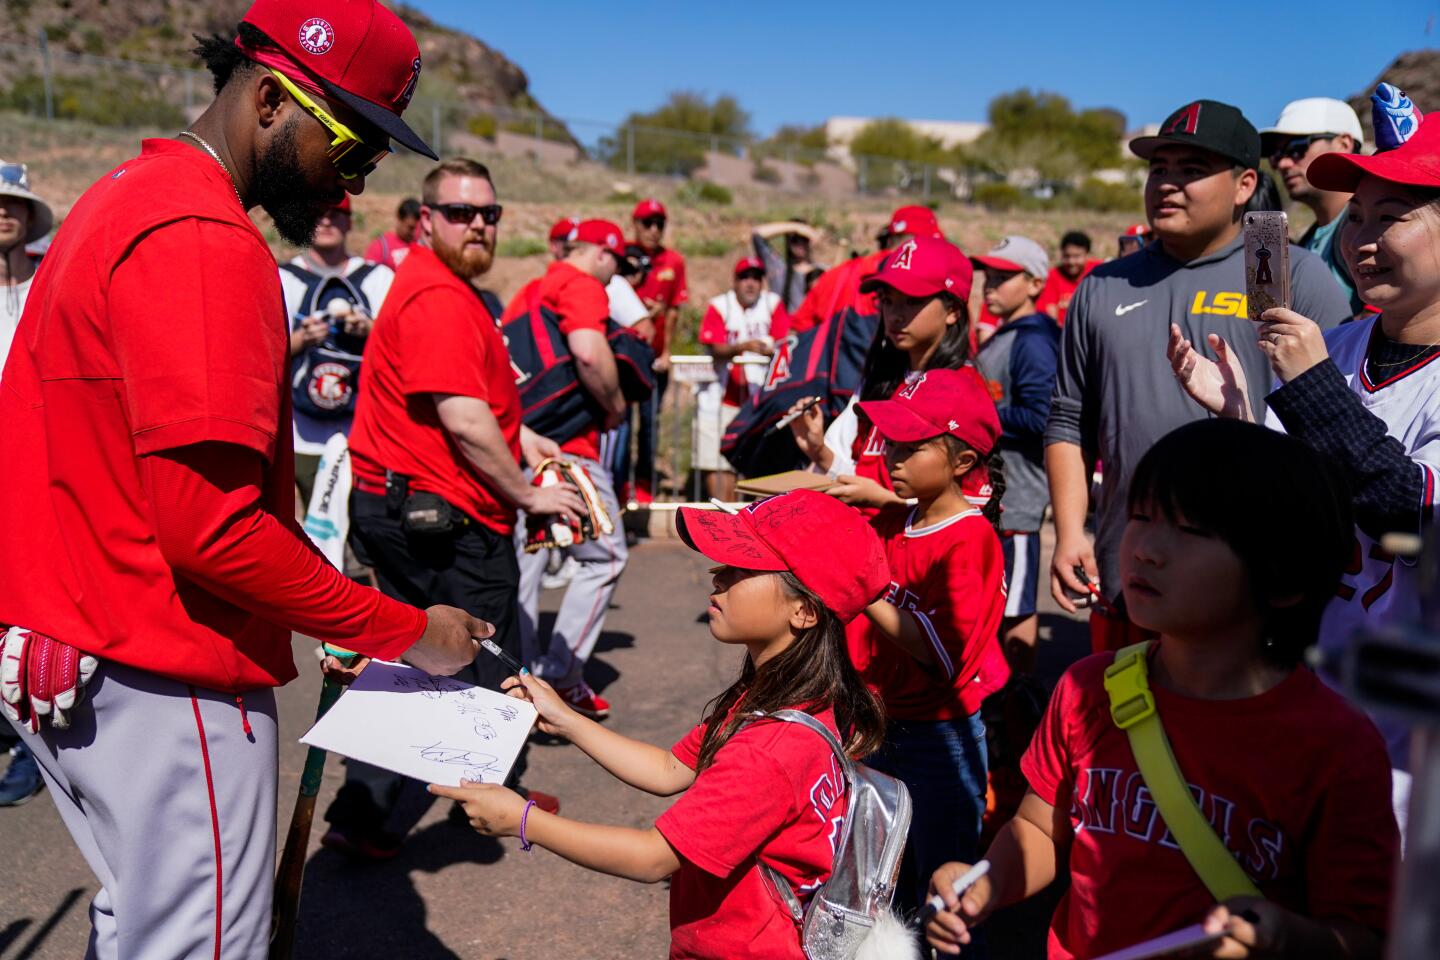 Angels prospect Jo Adell signs autographs after a spring training workout in Tempe.